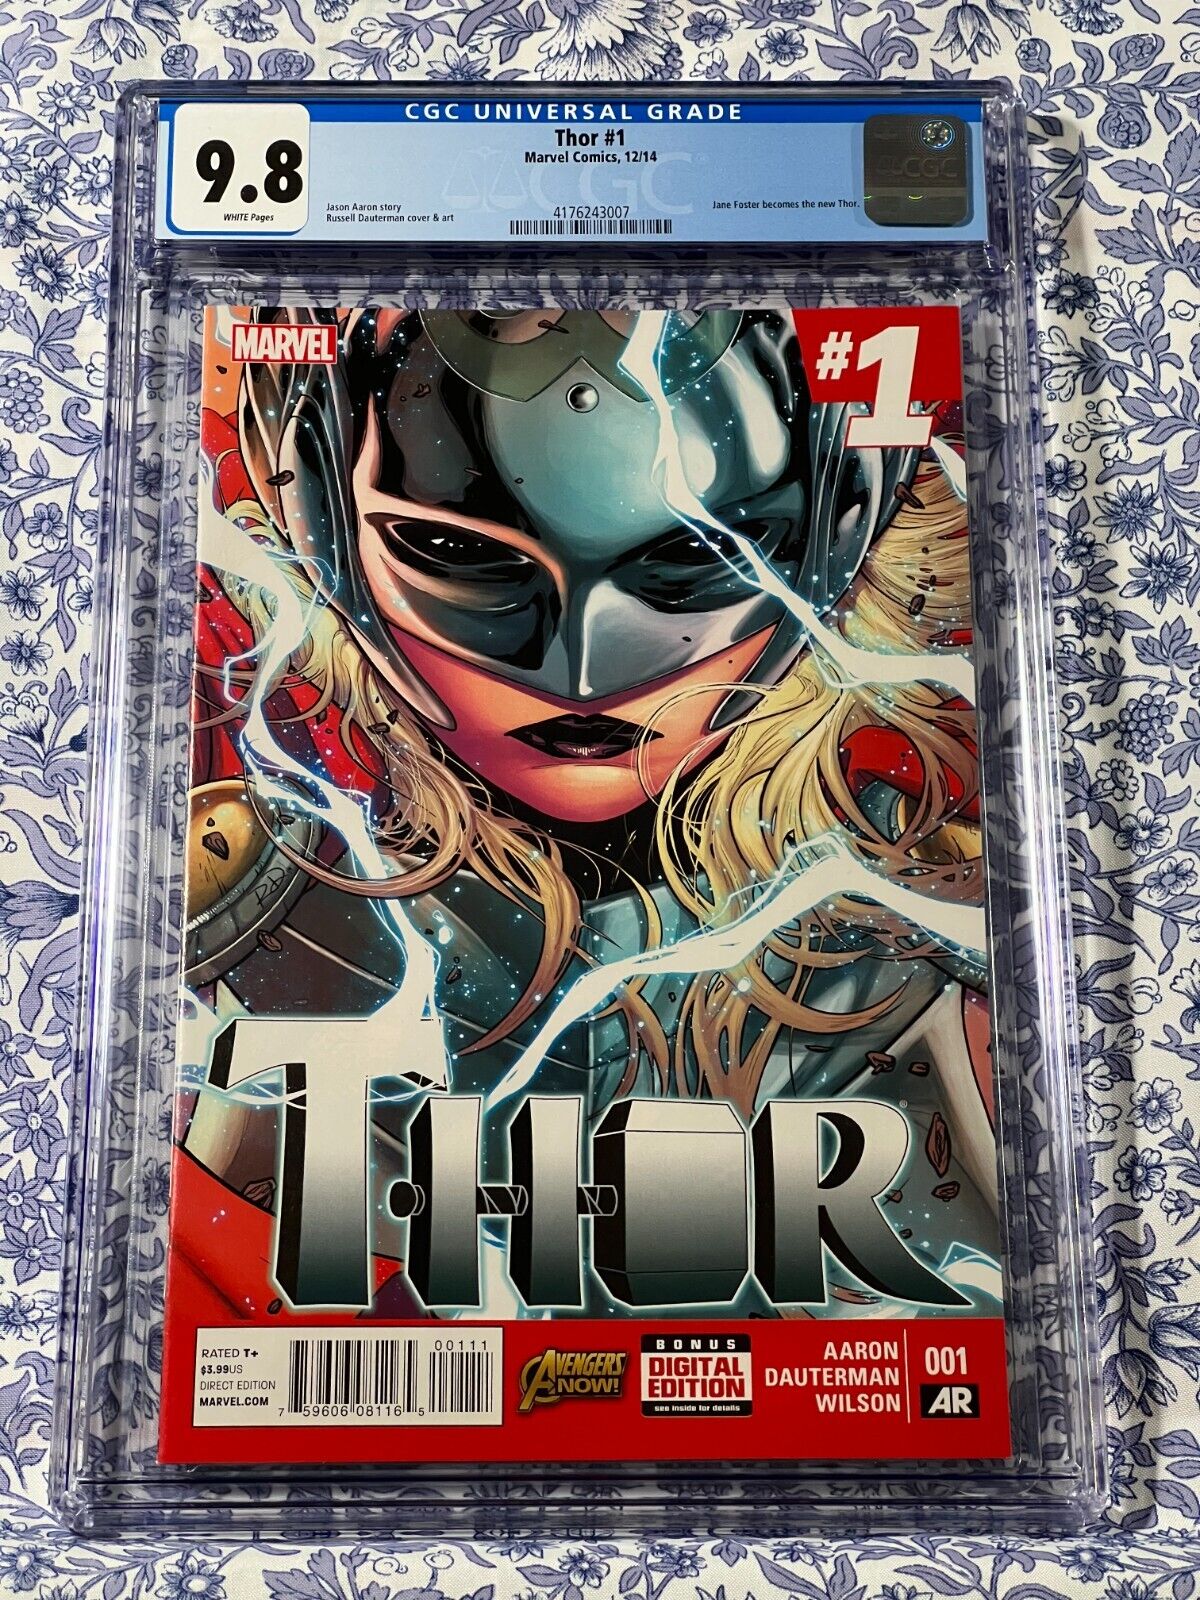 THOR #1 CGC 9.8 WP Jane Foster becomes the New THOR Russell Dauterman Trade